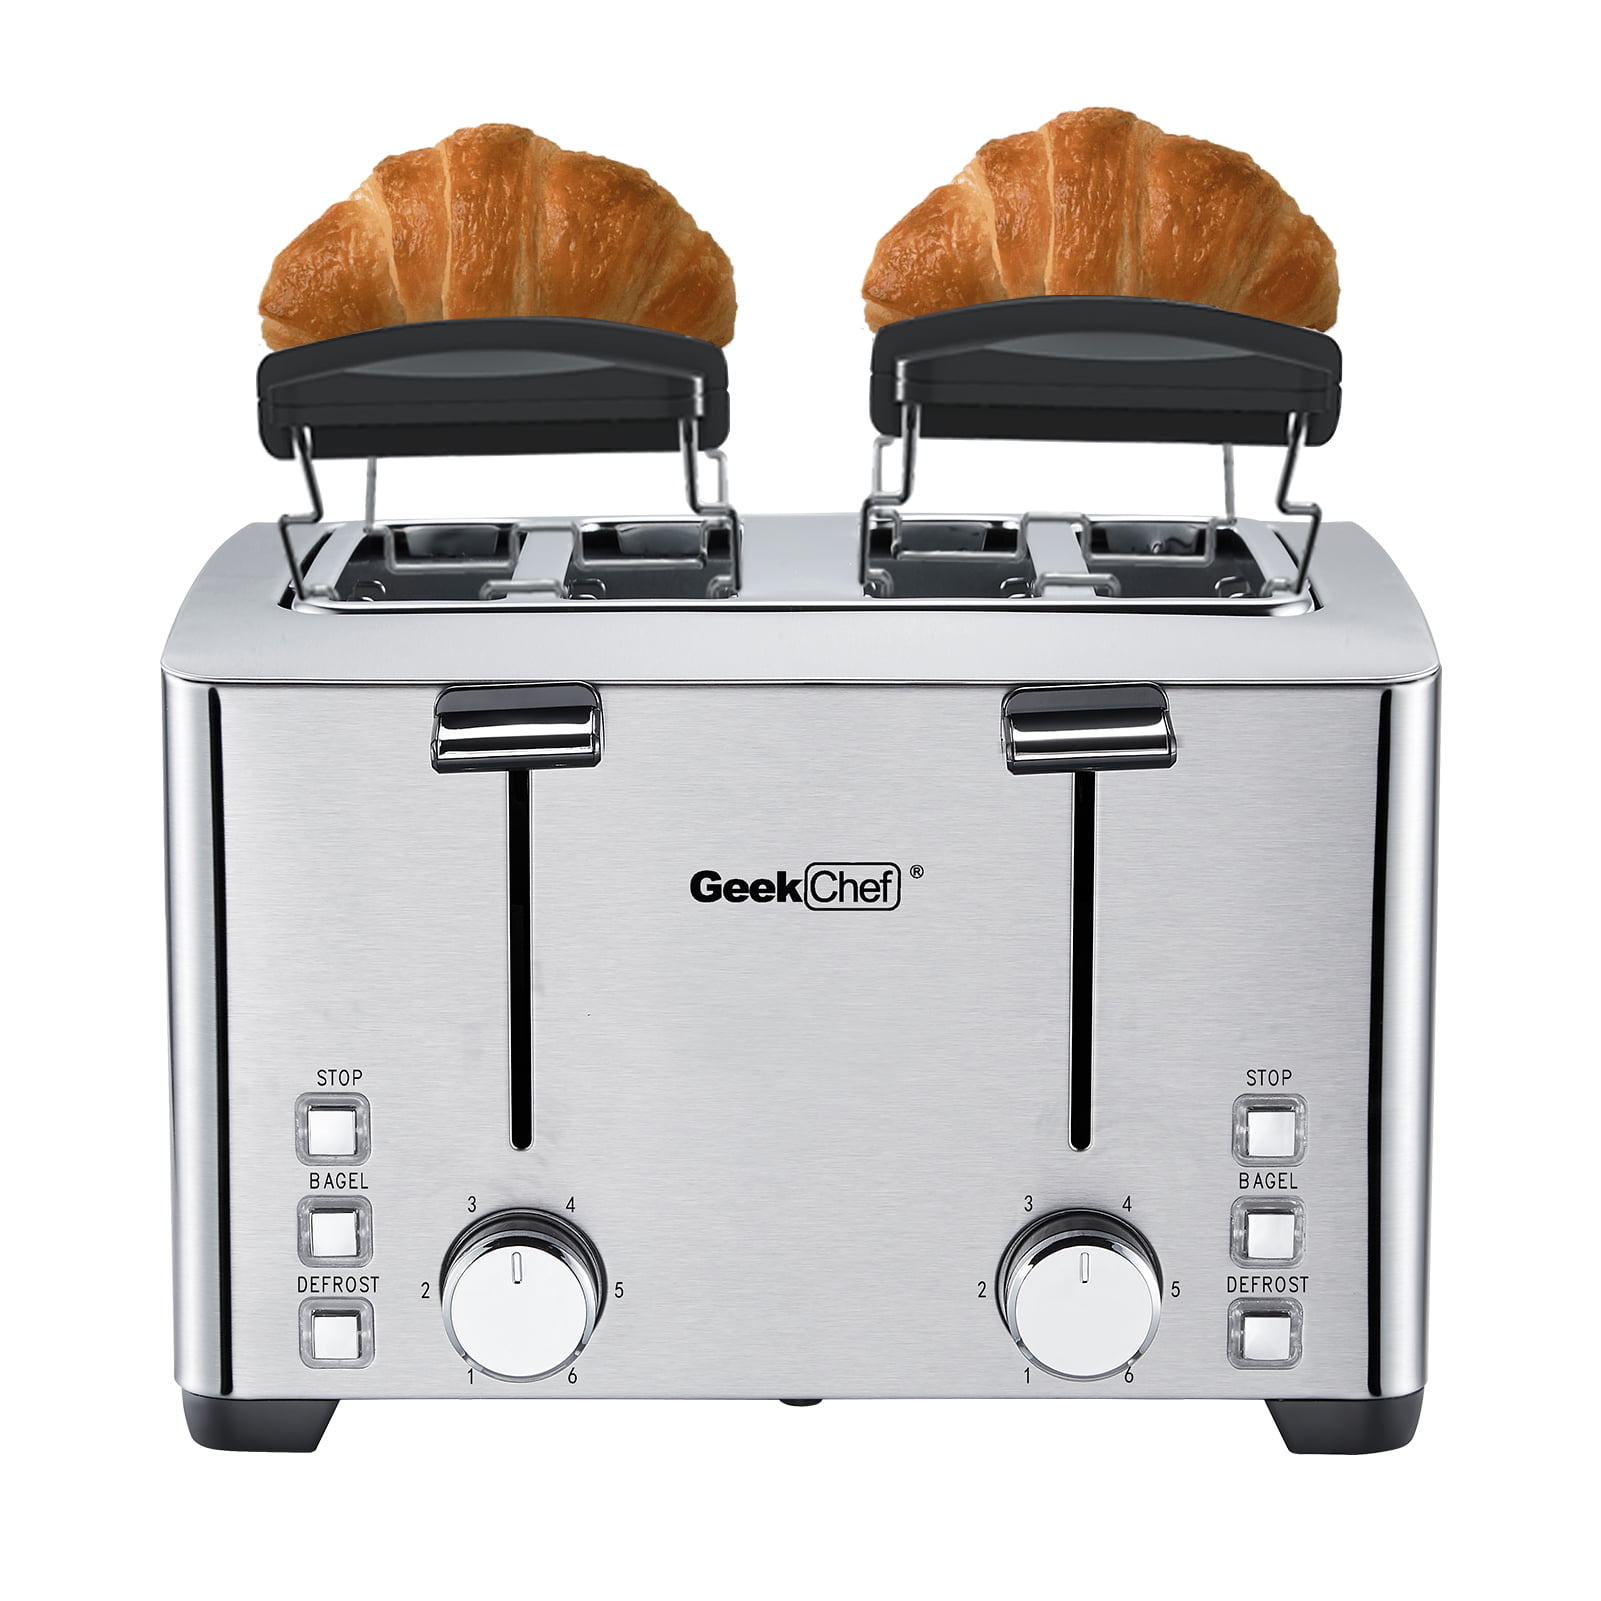 JEWJIO Long Slot Toaster 4 Slice, Stainless Steel Retro Toasters Best Rated  Prime with 125 Extra Wide Slot and DefrostReheatcancel Func